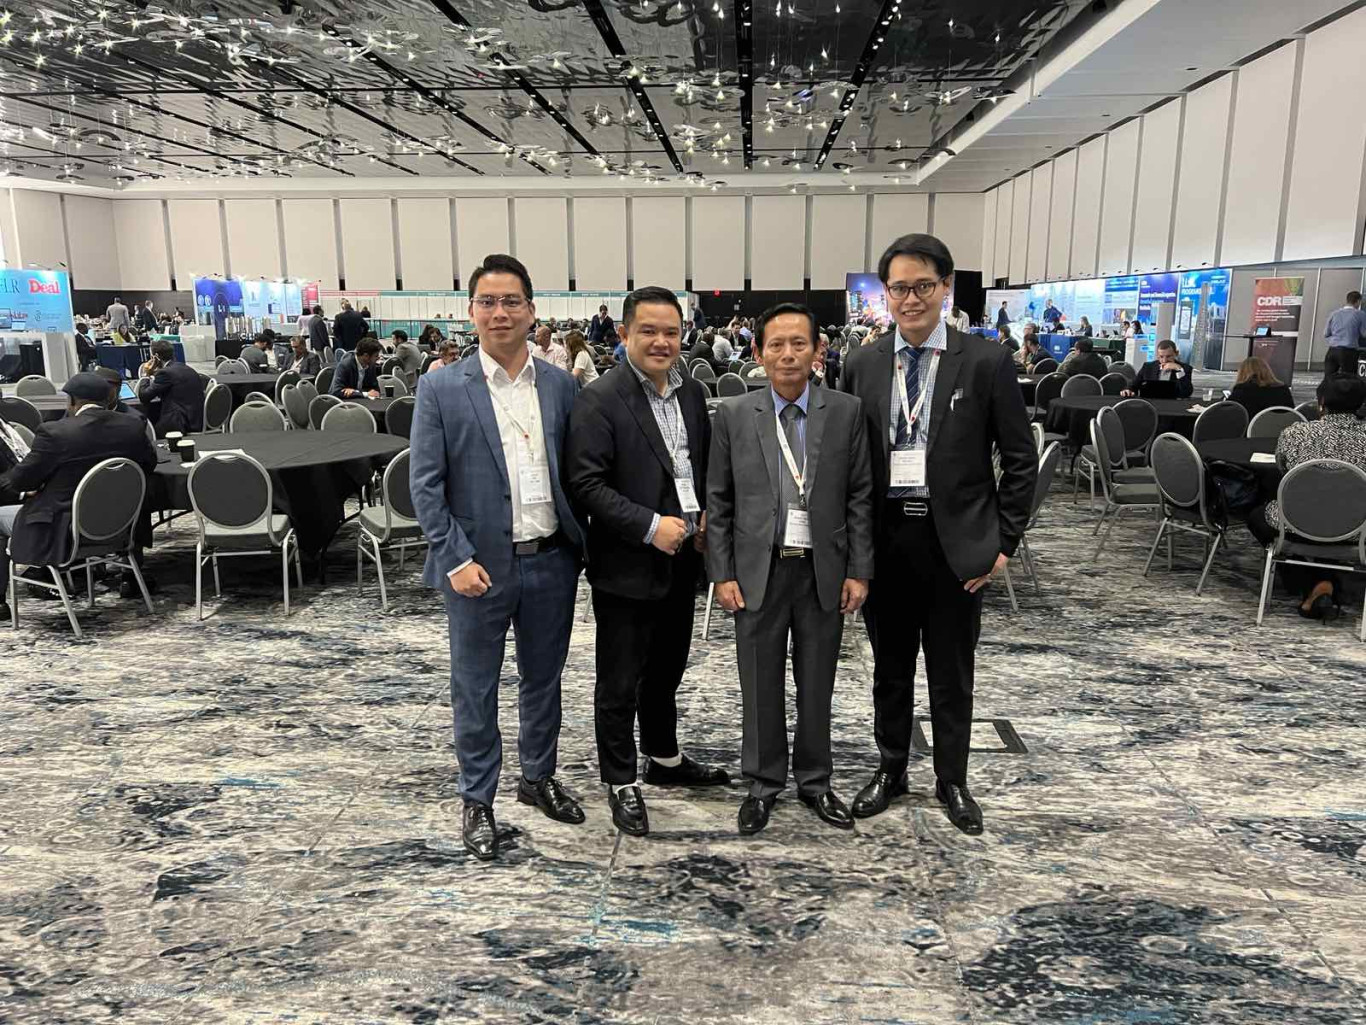 ASL LAW and the representative of the Vietnam Bar Federation (Vice President of the Vietnam Bar Federation - Phan Trung Hoai) at the IBA 2022 annual conference